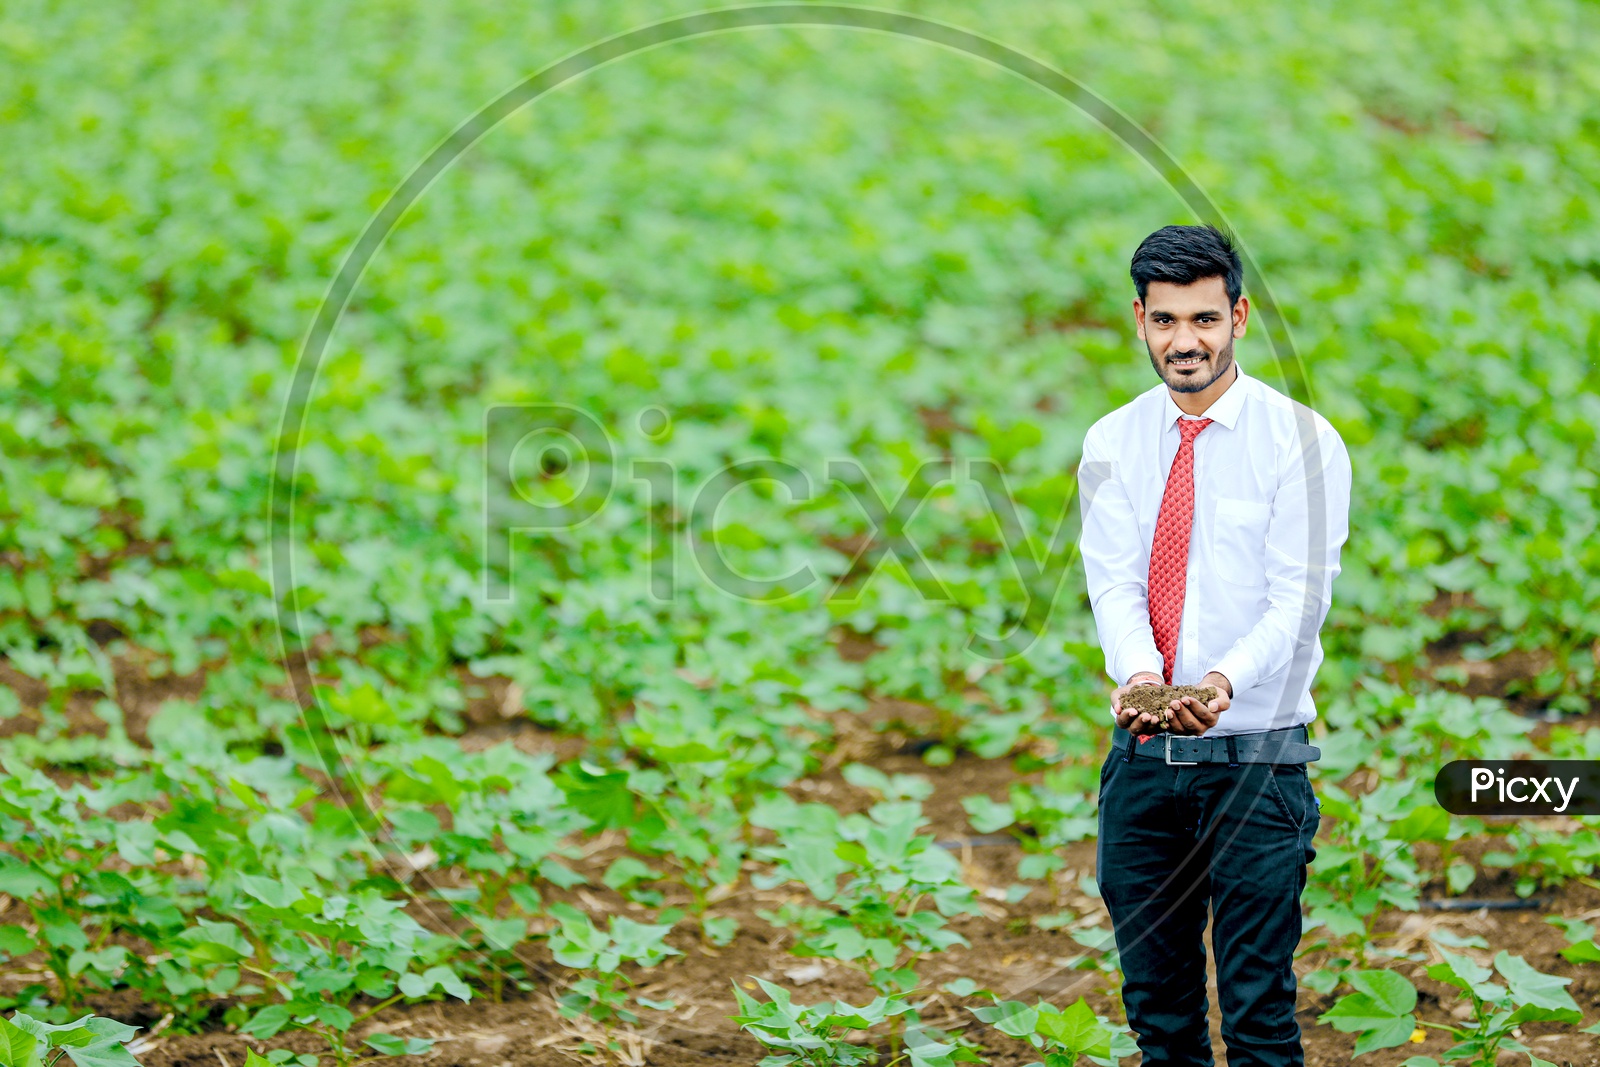 A Young Professional In Agricultural Field With Soil in Hand